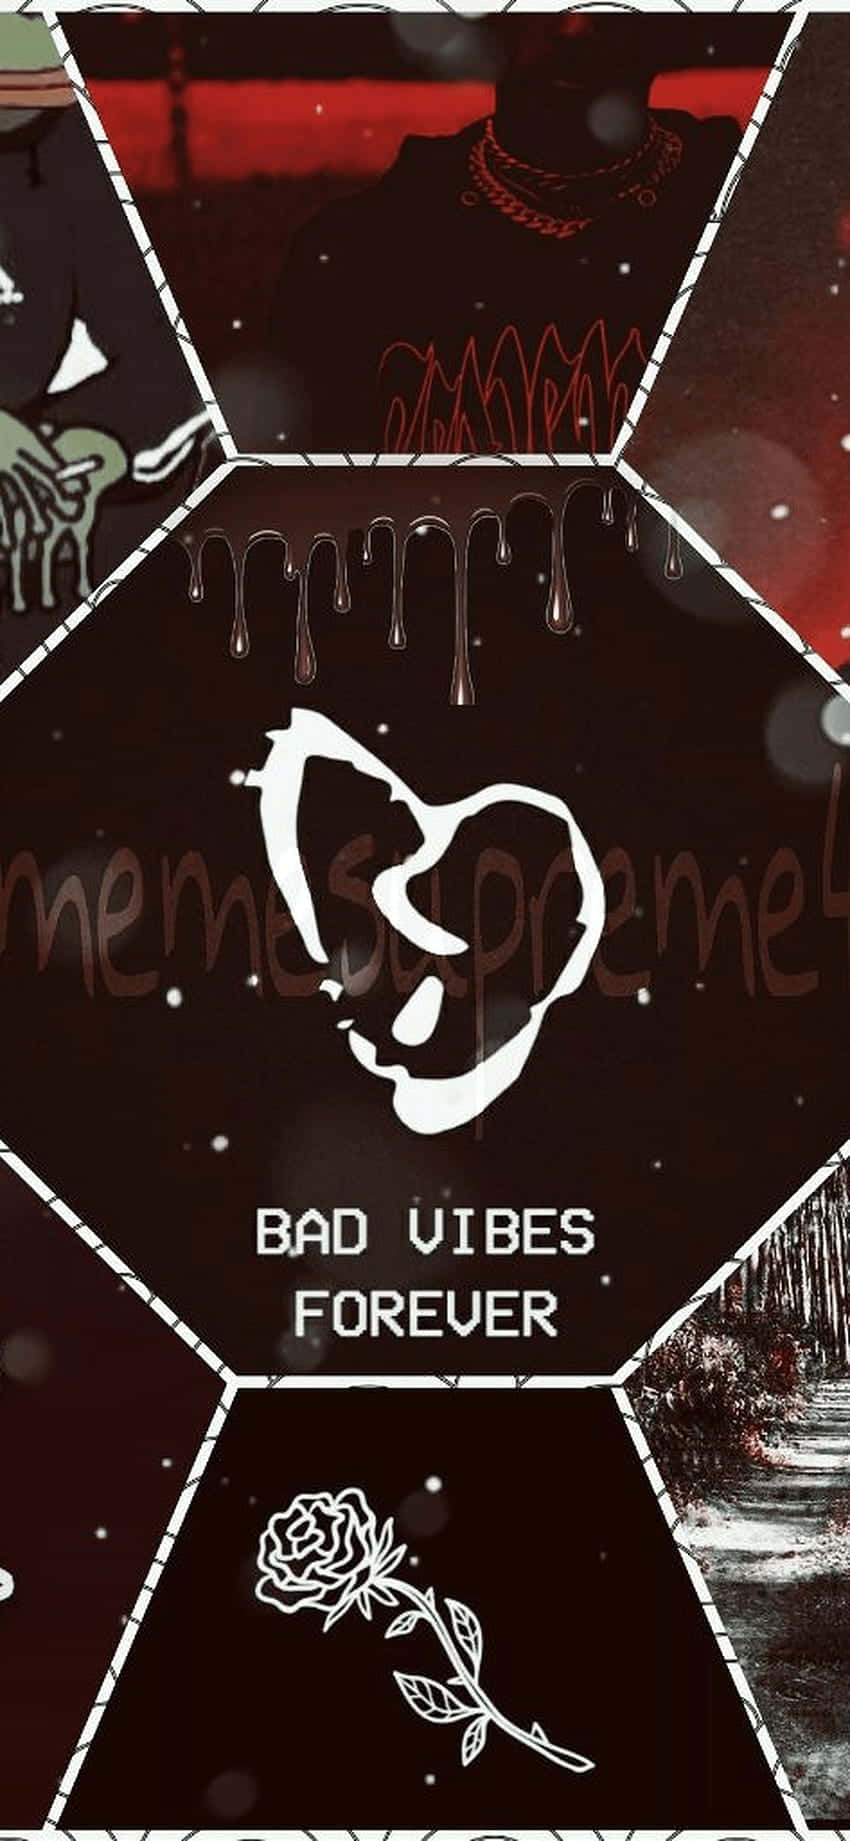 Sad Vibes Bad Vibes Forever Wallpaper